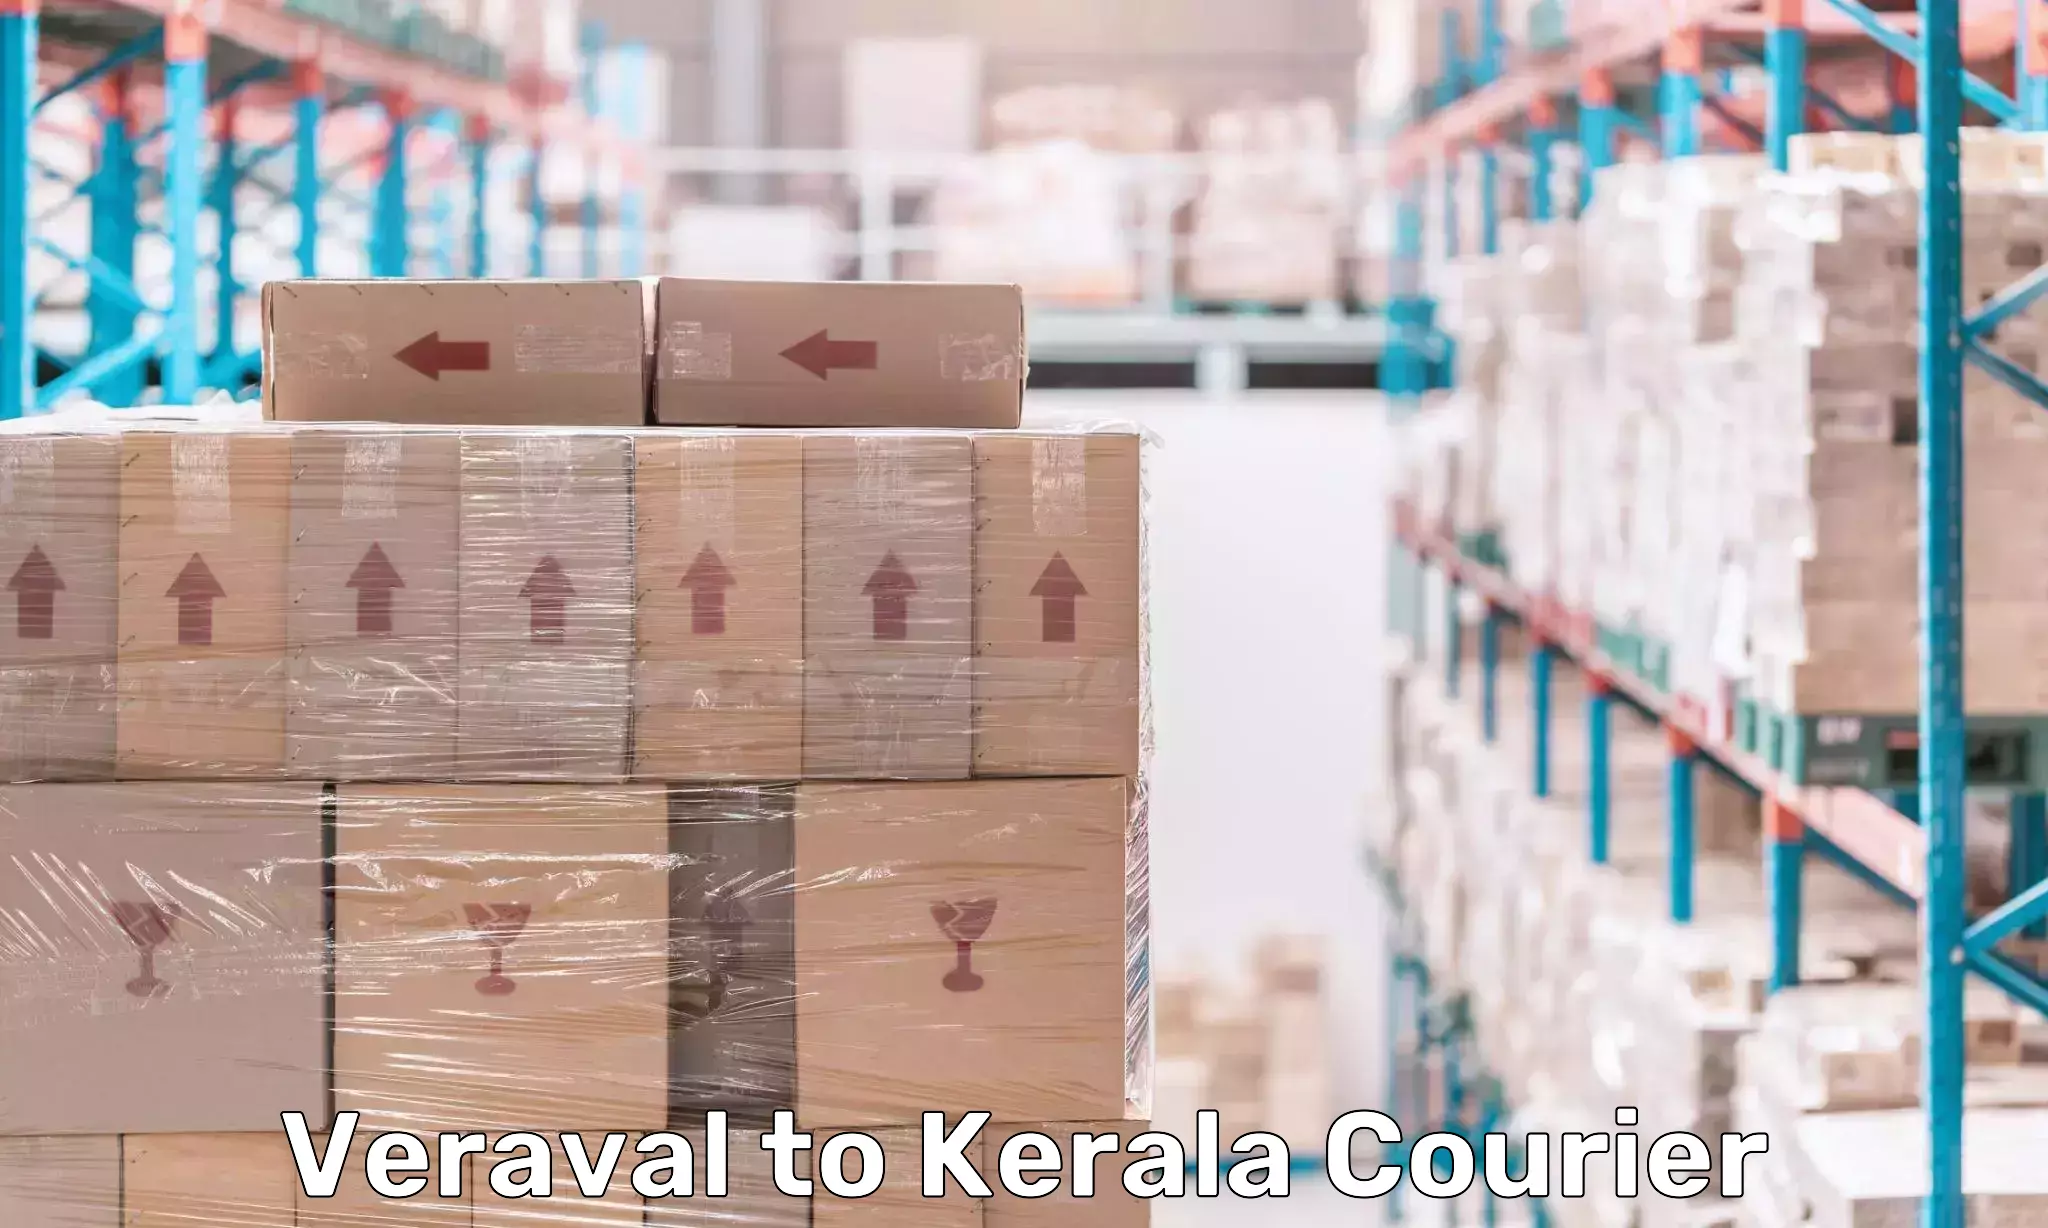 Global shipping solutions Veraval to Kalpetta